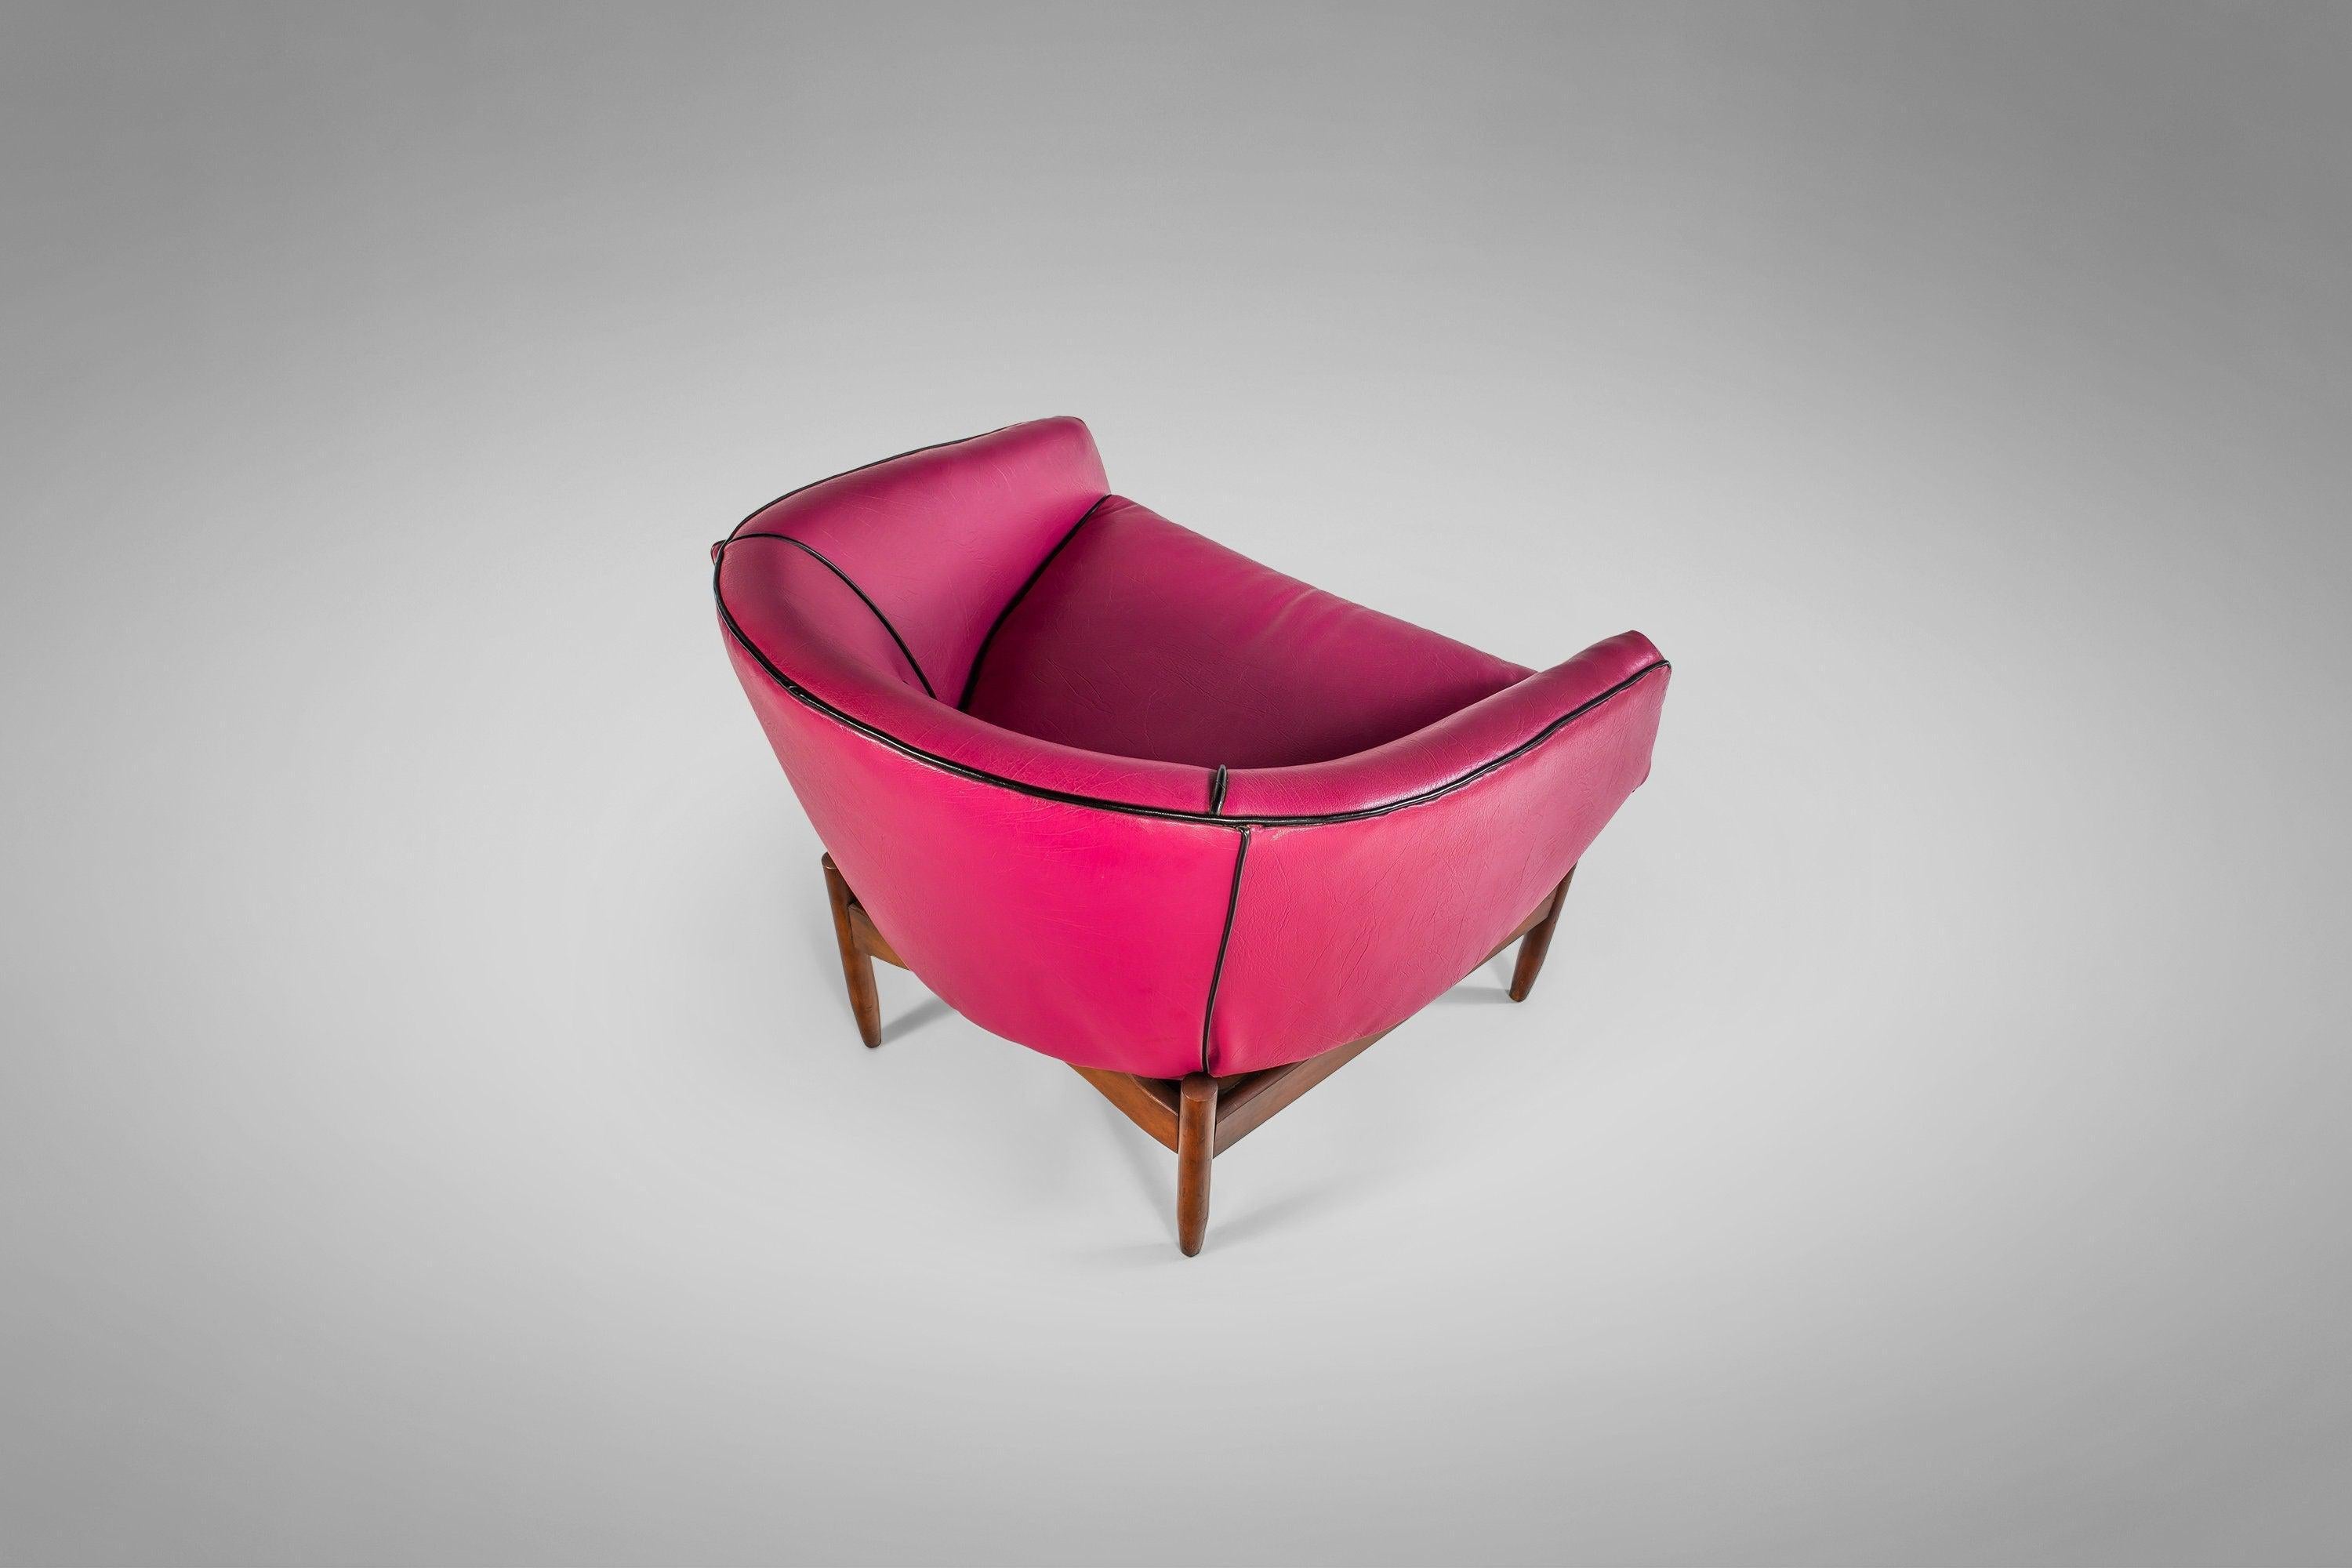 American Mid Century Modern Sculptural Barrel Lounge Chair by Lawrence Peabody, c. 1960s For Sale